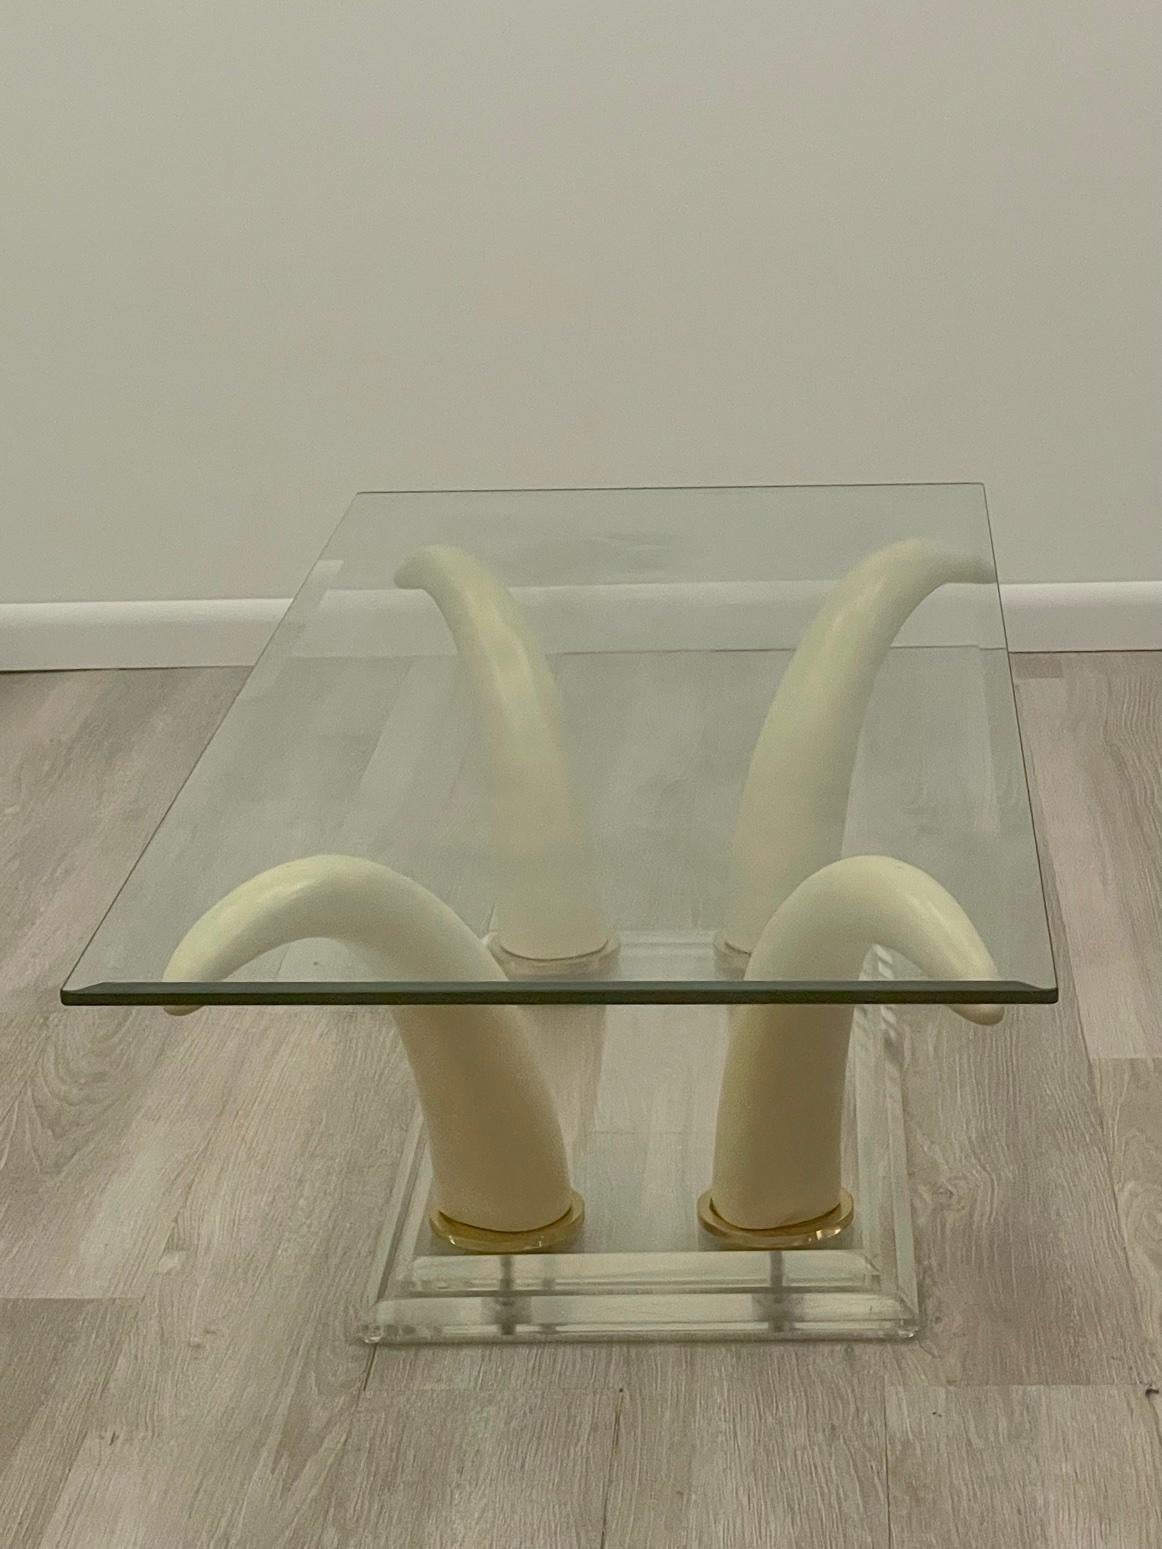 Super glamorous Mid-Century Modern rectangular glass coffee table having a sizzling hot faux Horn and lucite base with brass trim.

Meausres: 1/2